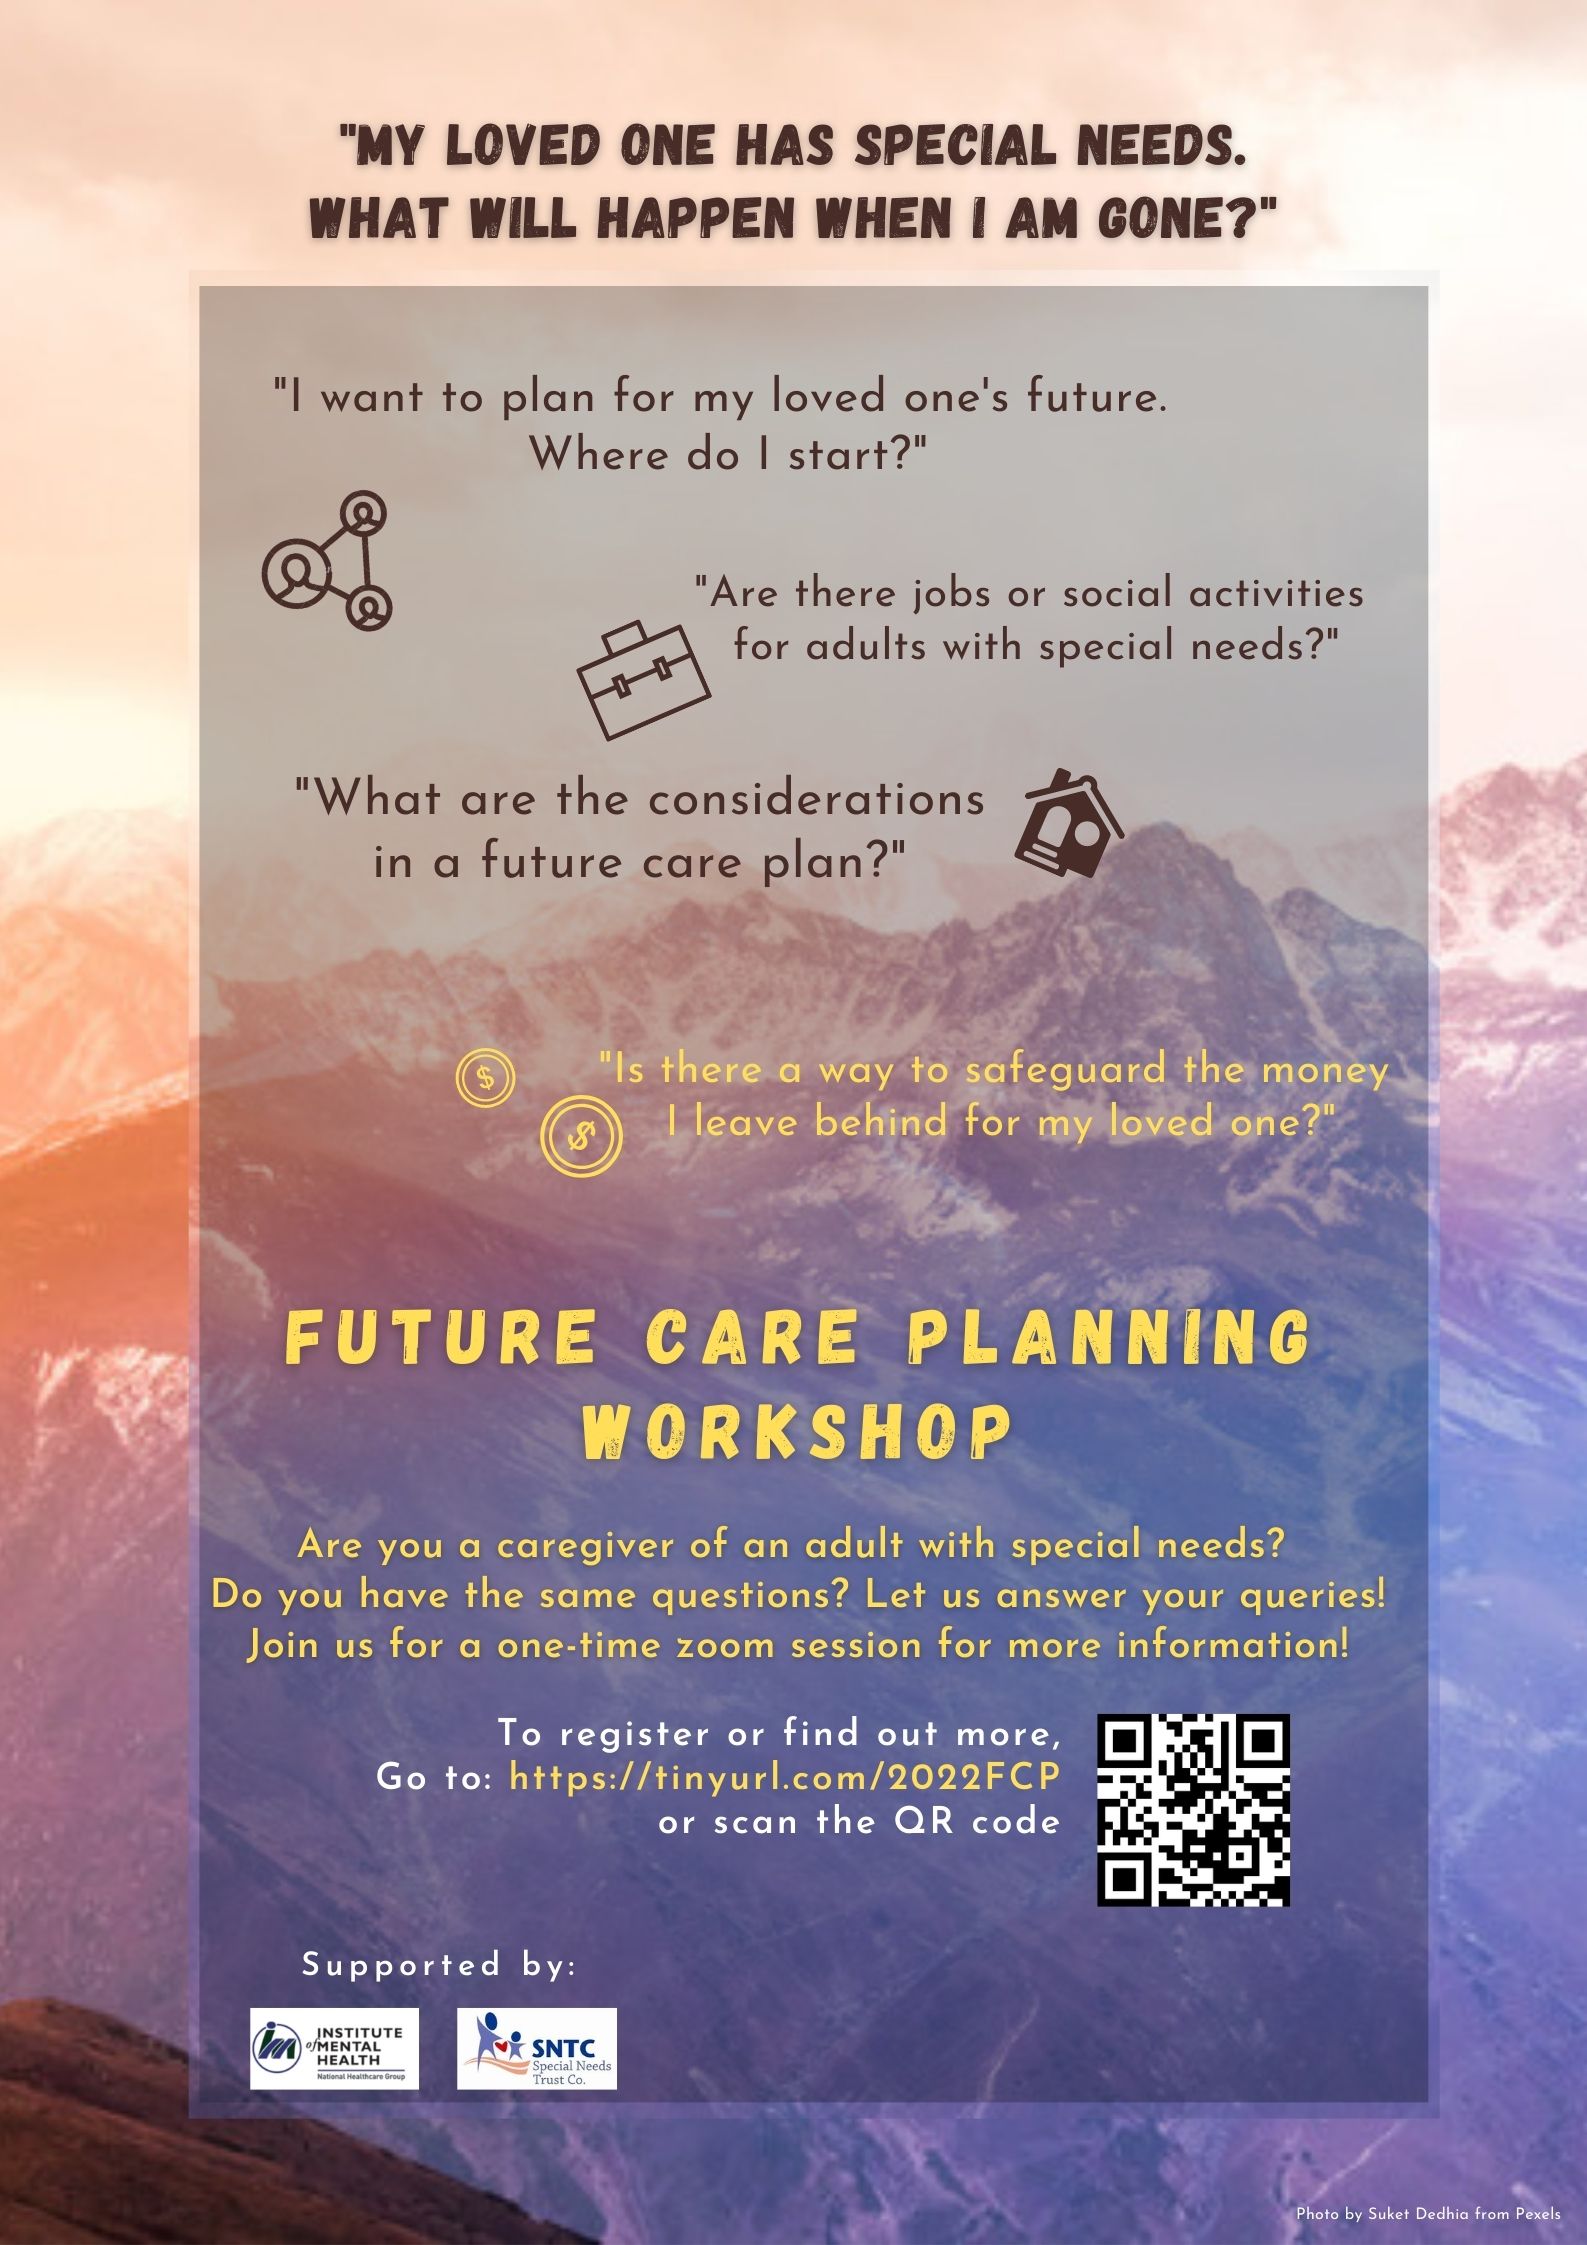 IMH-SNTC Future Care Planning Workshop (Aug 2022) English